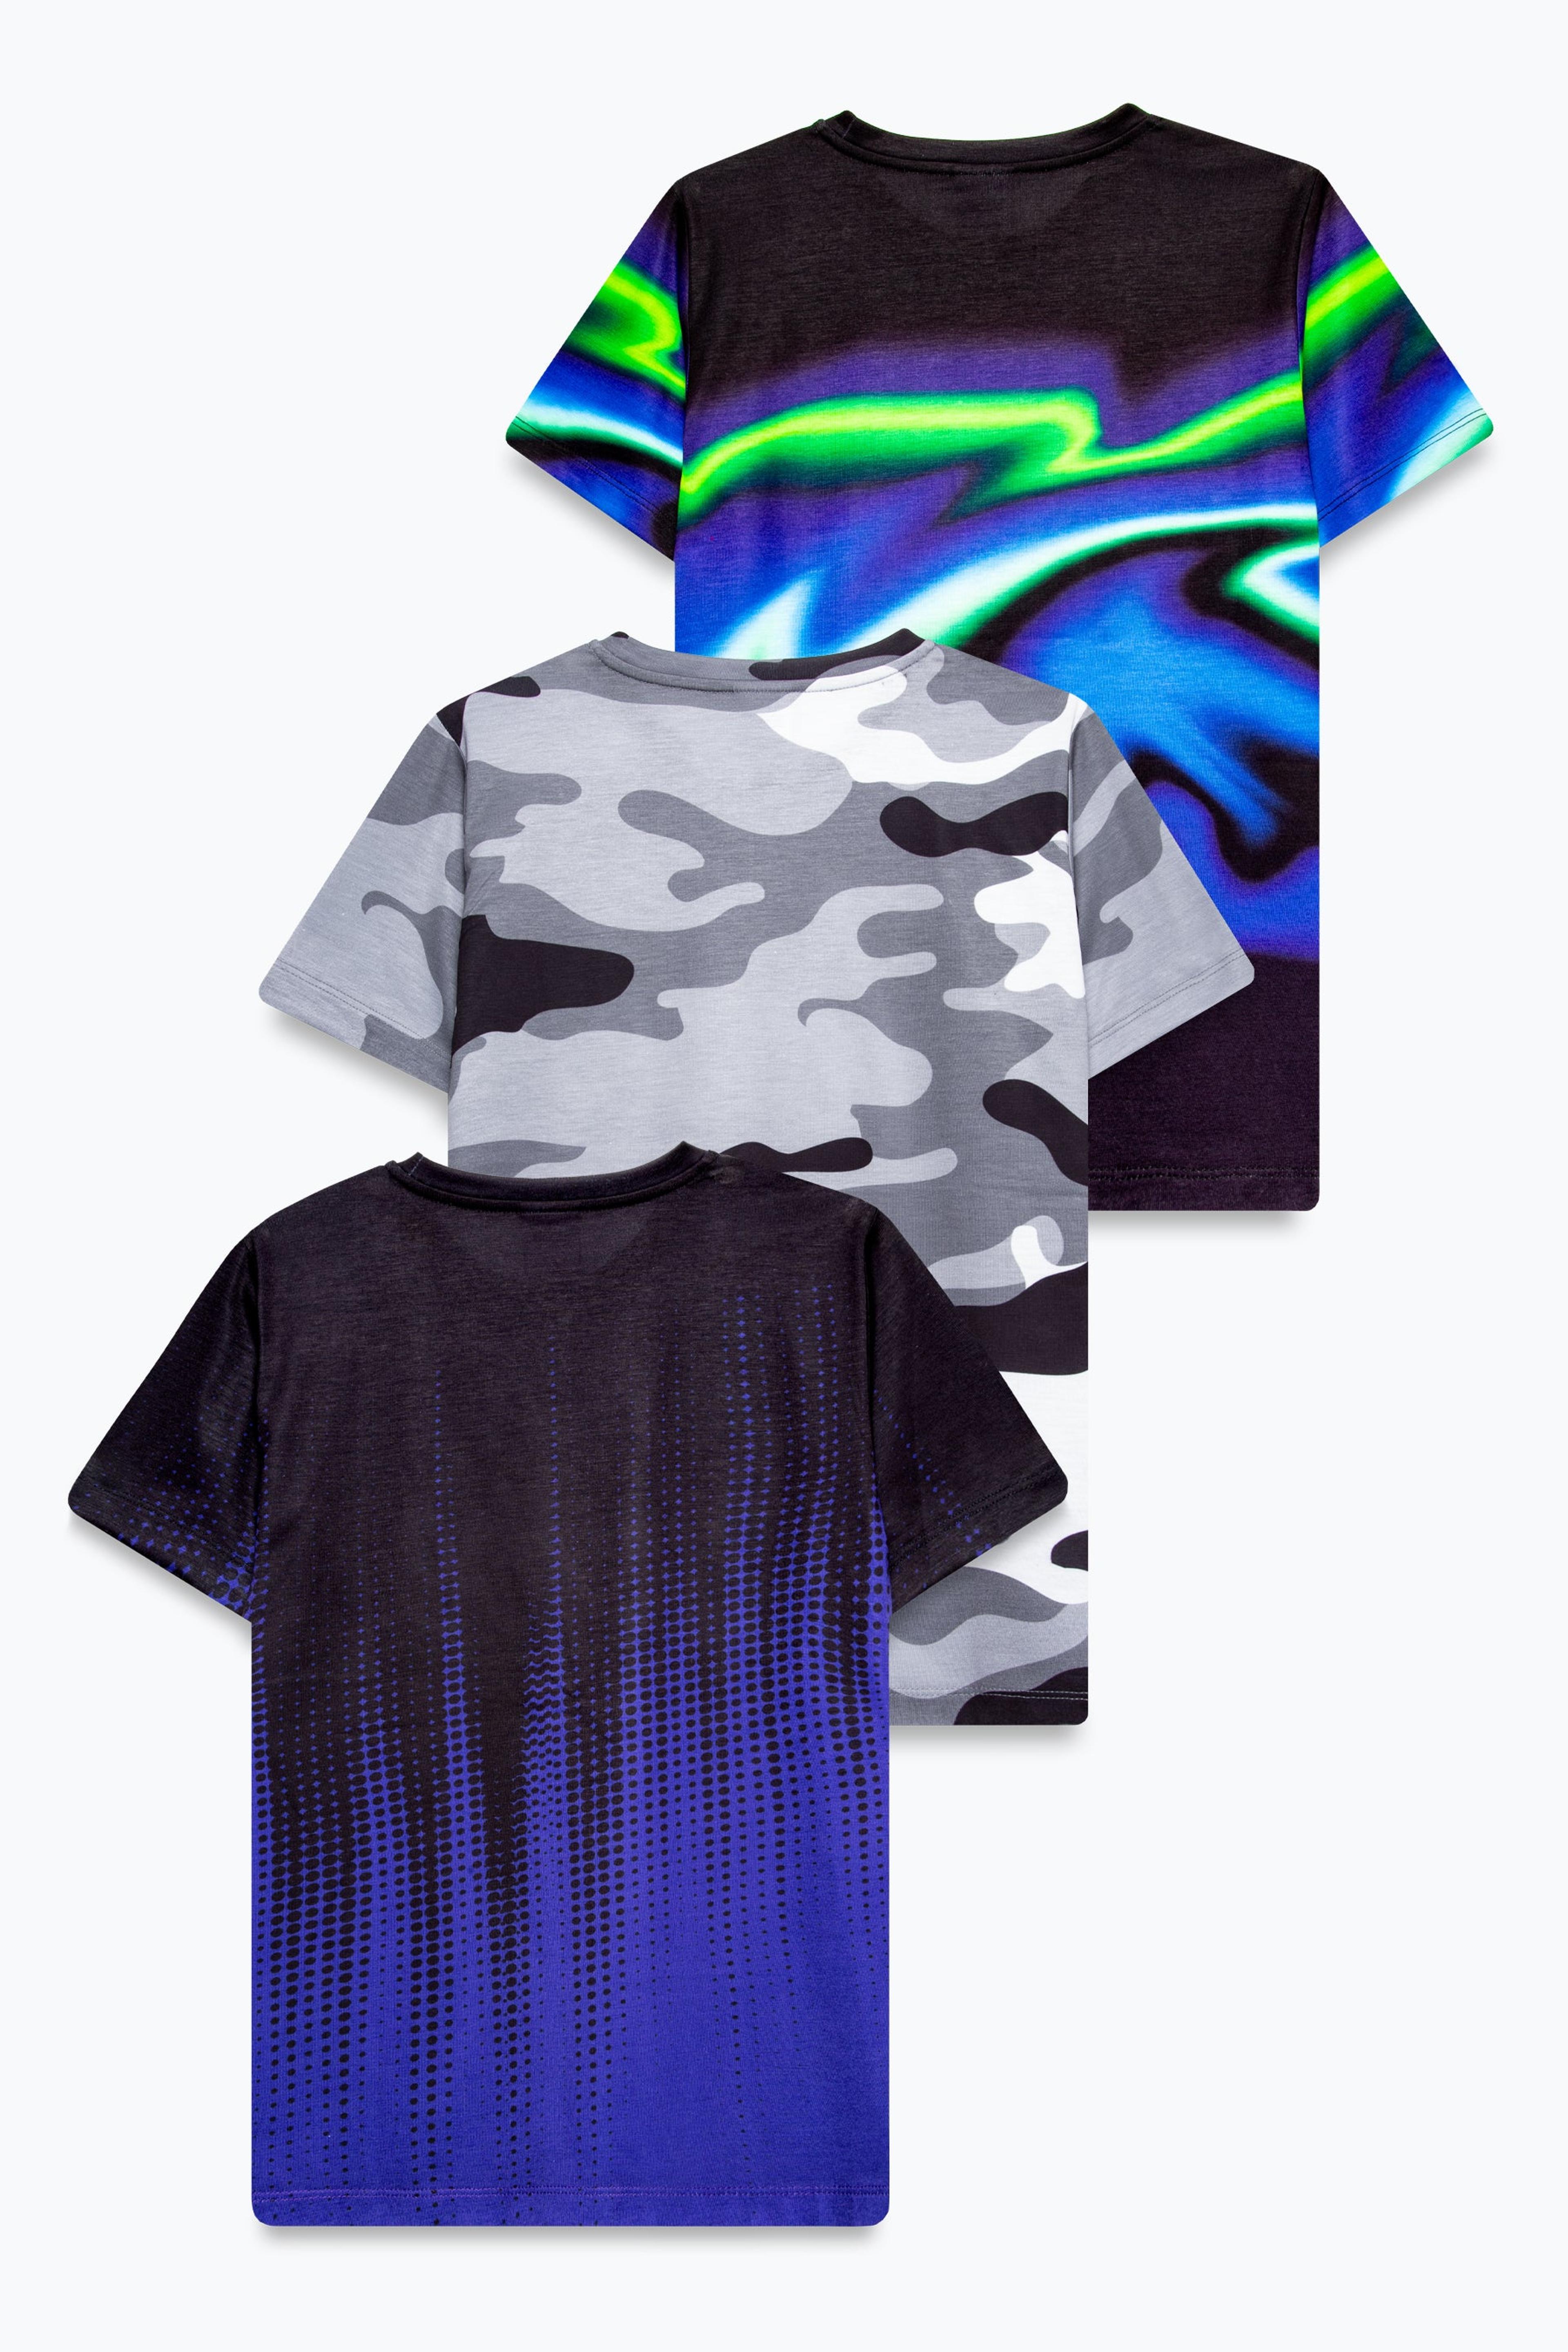 Alternate View 1 of HYPE BOYS DRIP & CAMO & WAVE 3 PACK T-SHIRTS